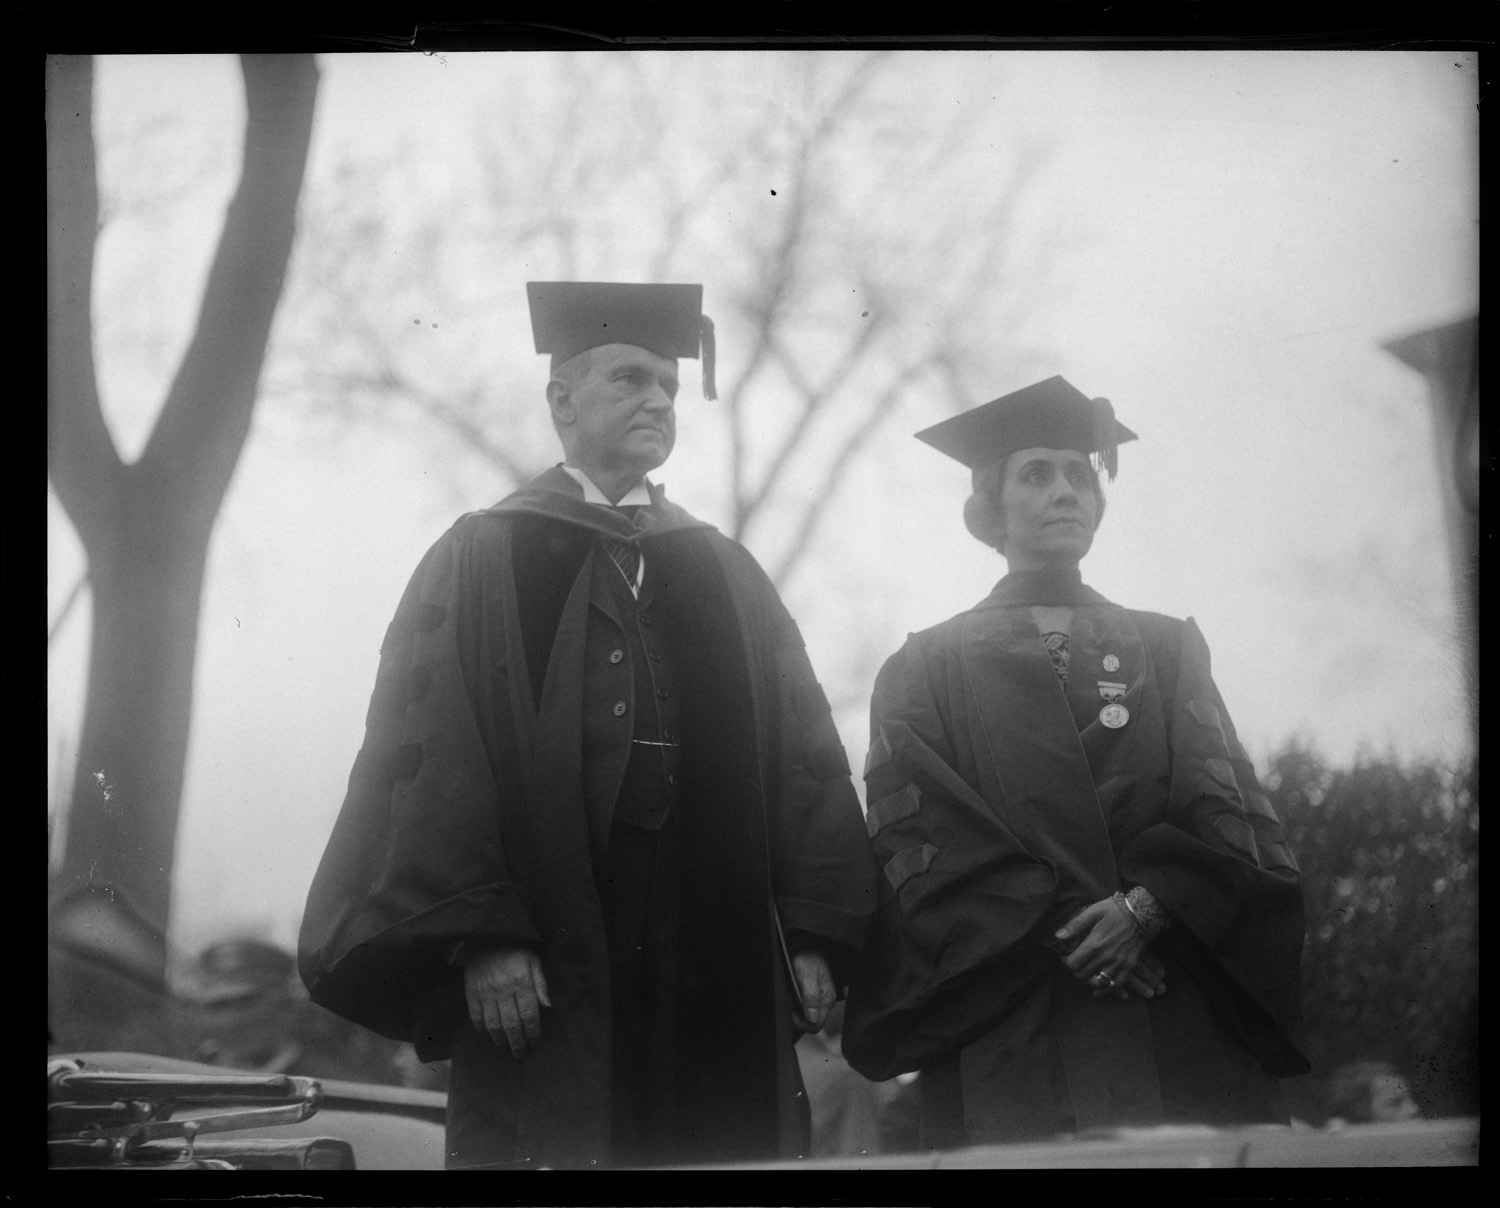 The Coolidges at Andover, May 1928, where Coolidge spoke at commencement before over 10,000 people, including a class of 650. 